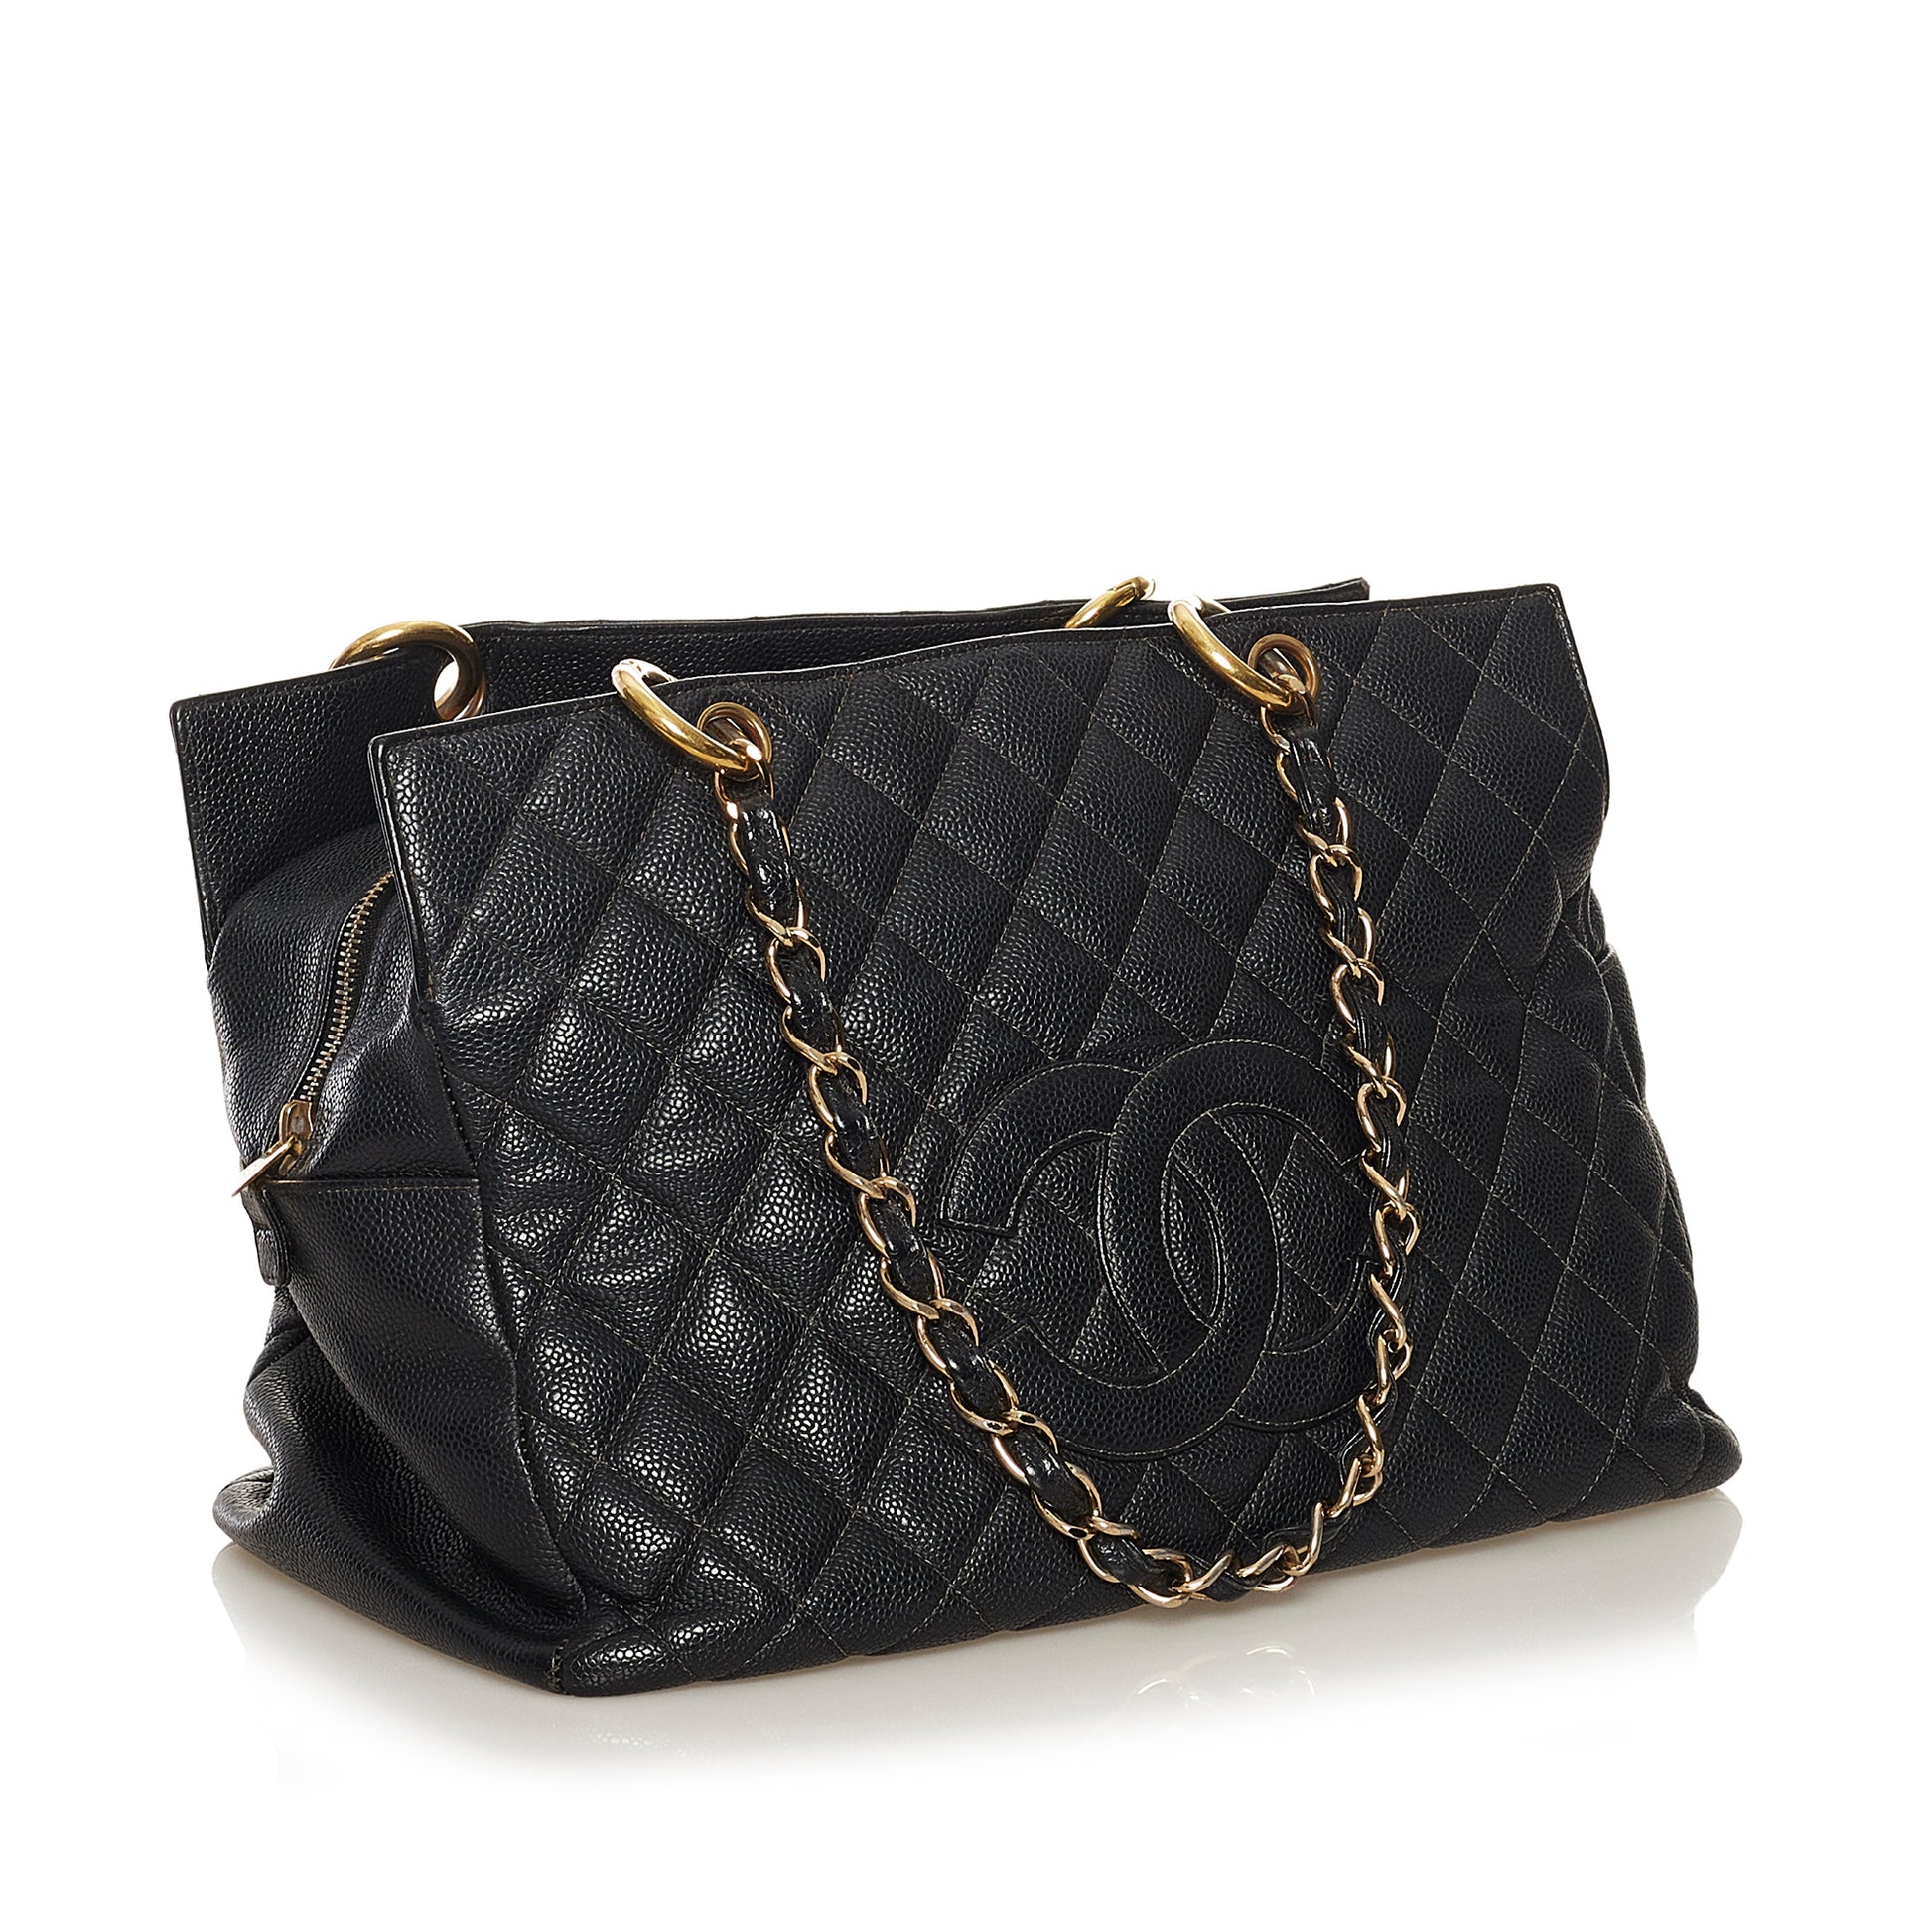 CHANEL Caviar Chain Shoulder Bag Shopping Tote Black Quilted Purse